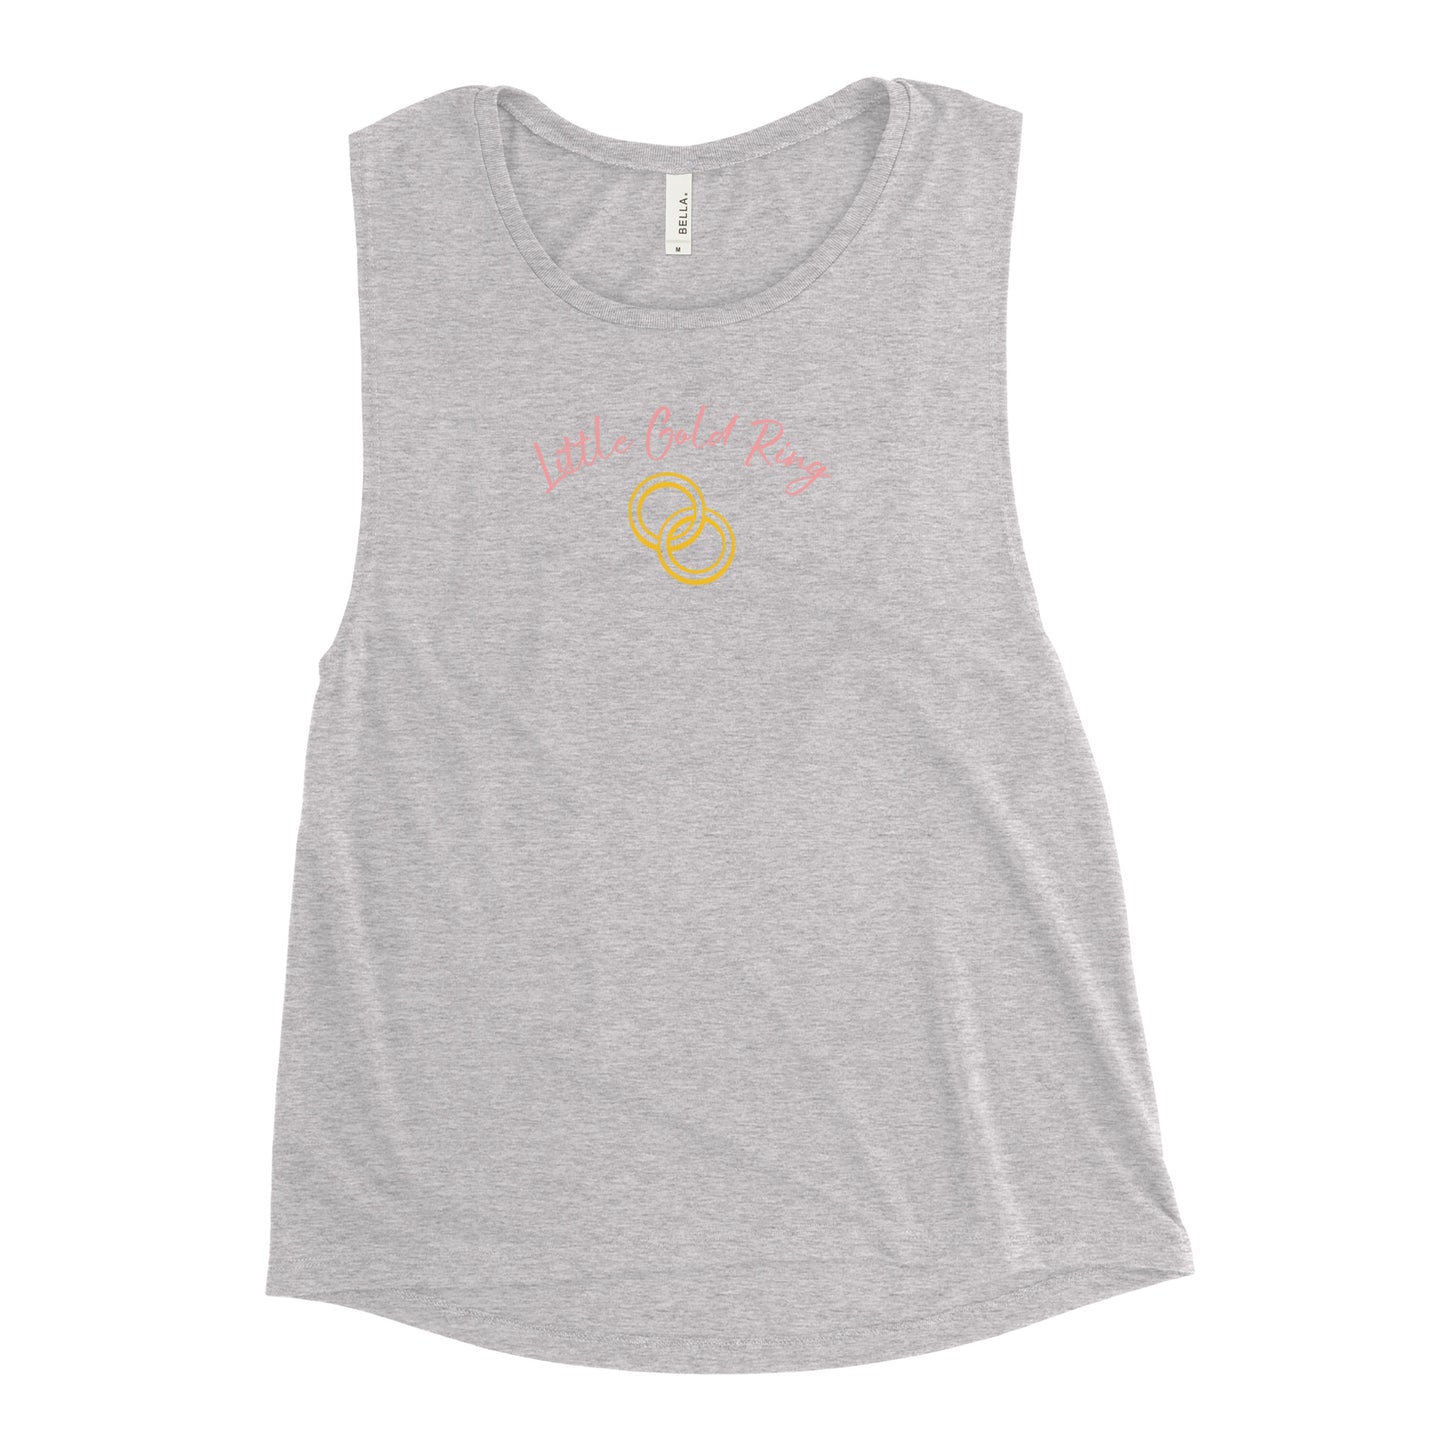 Little Gold Ring Ladies’ Muscle Tank